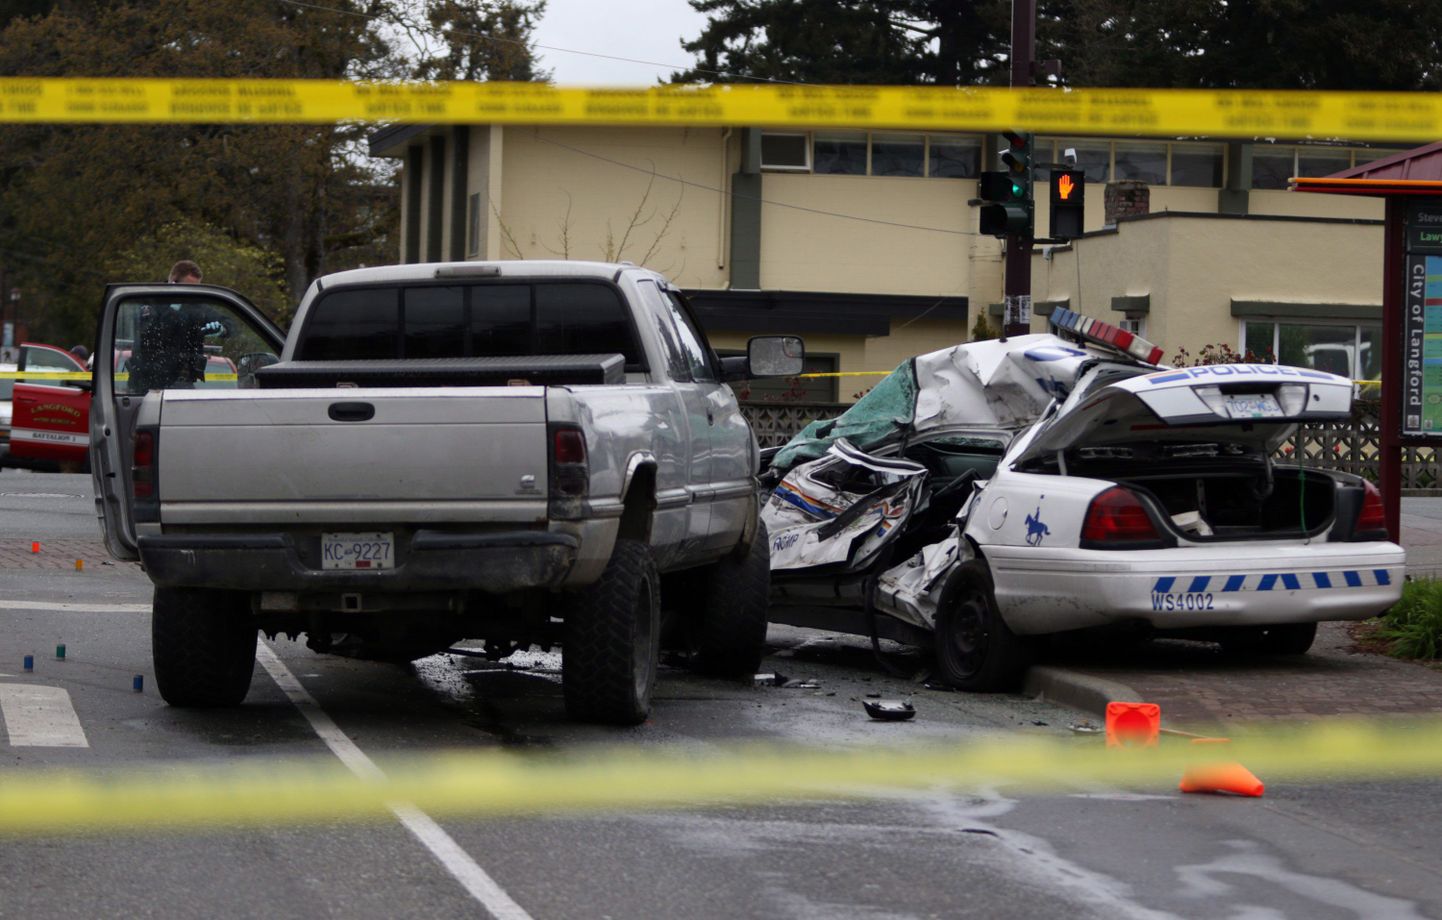 Police tape marks off the scene of the crash involving a police car and a pickup truck in Langford, B.C., Tuesday, April 5, 2016. RCMP Const. Sarah Beckett was killed in the crash. THE CANADIAN PRESS/Chad Hipolito